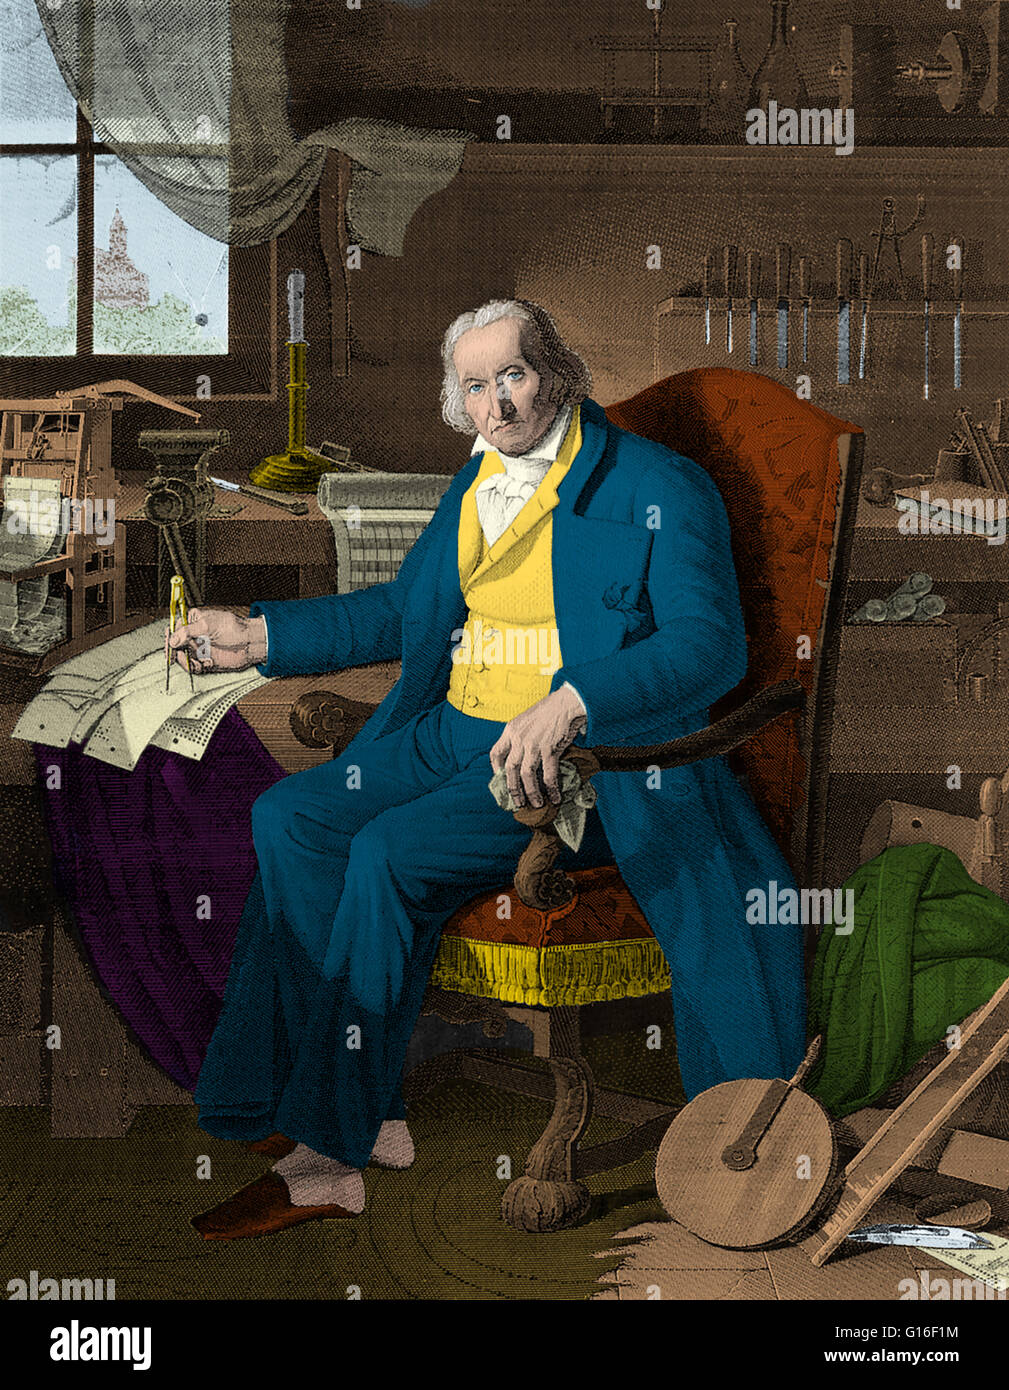 Joseph-Marie Charles Jacquard (July 7, 1752 - August 7, 1834) was a French weaver and merchant. He played an important role in the development of the earliest programmable loom (the Jacquard loom), which in turn played an important role in the development Stock Photo